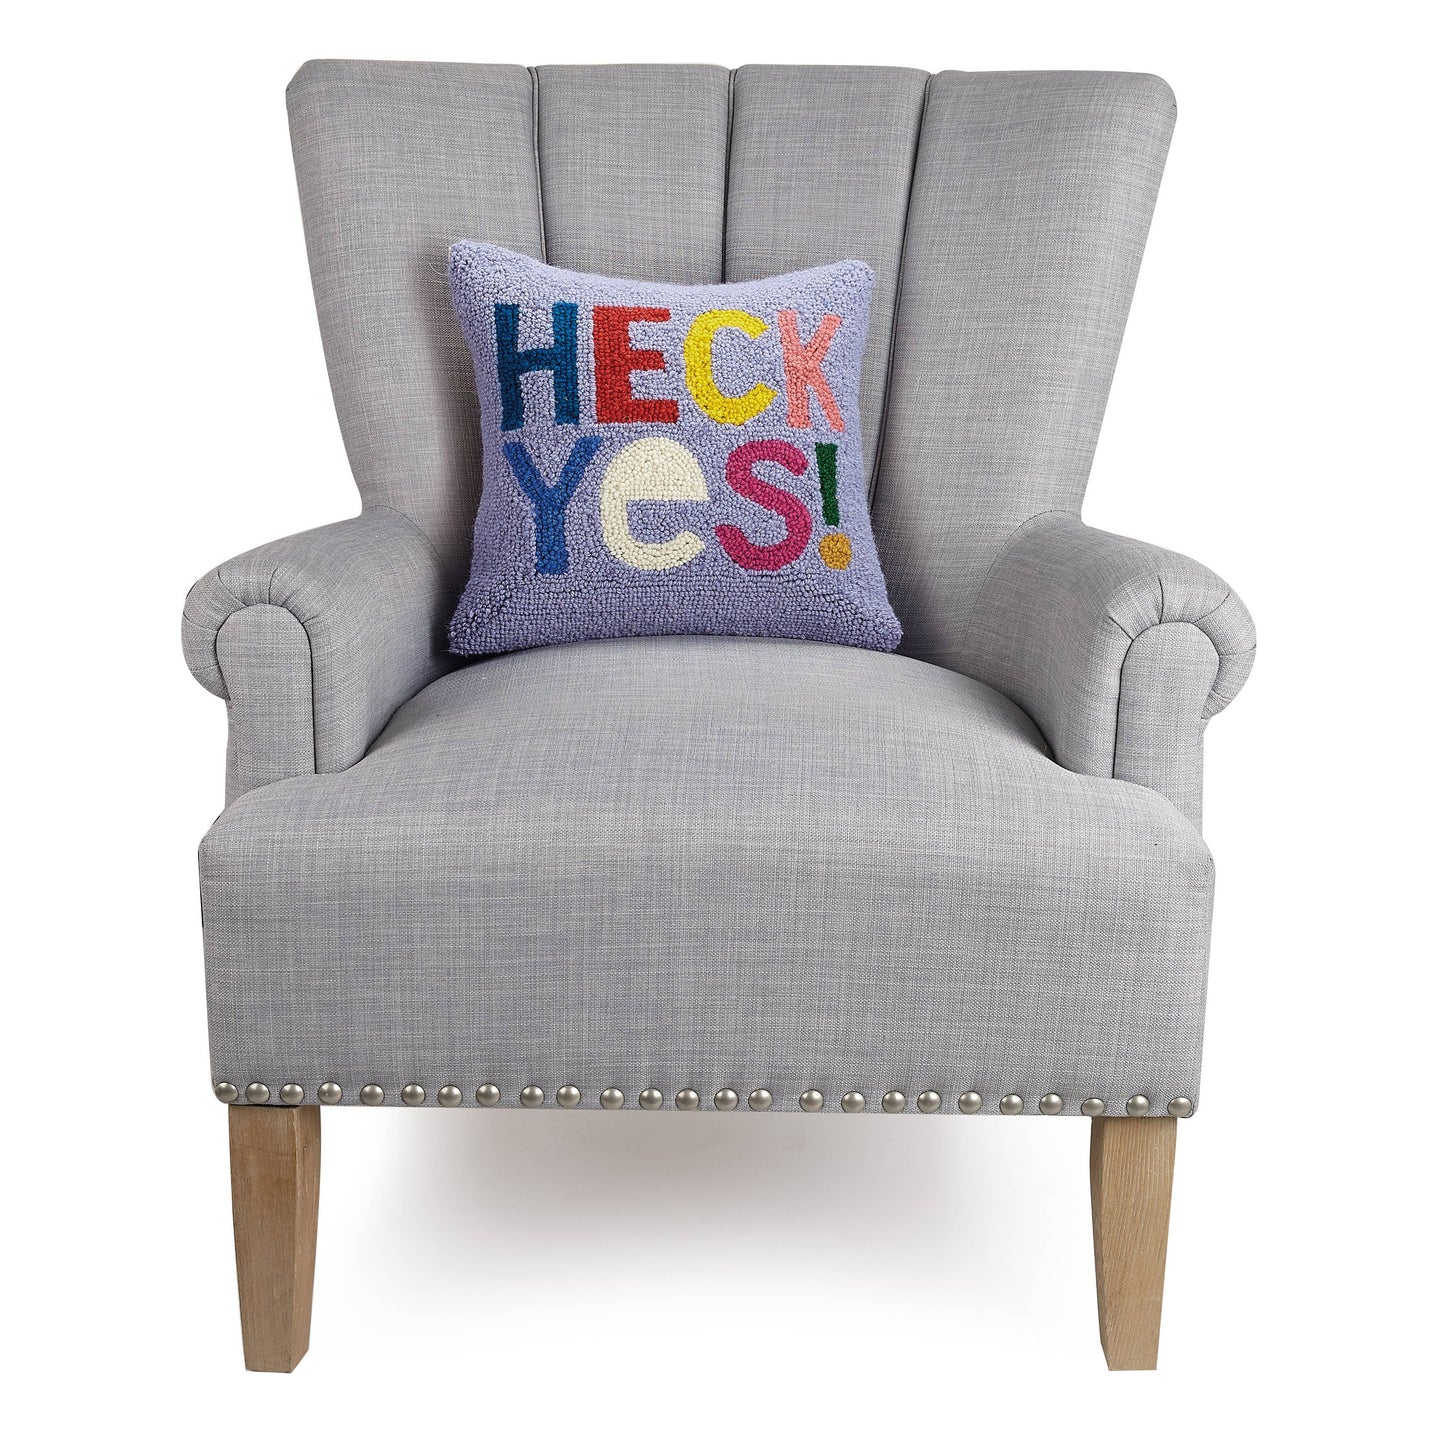 Heck Yes! Pillow 14x14"